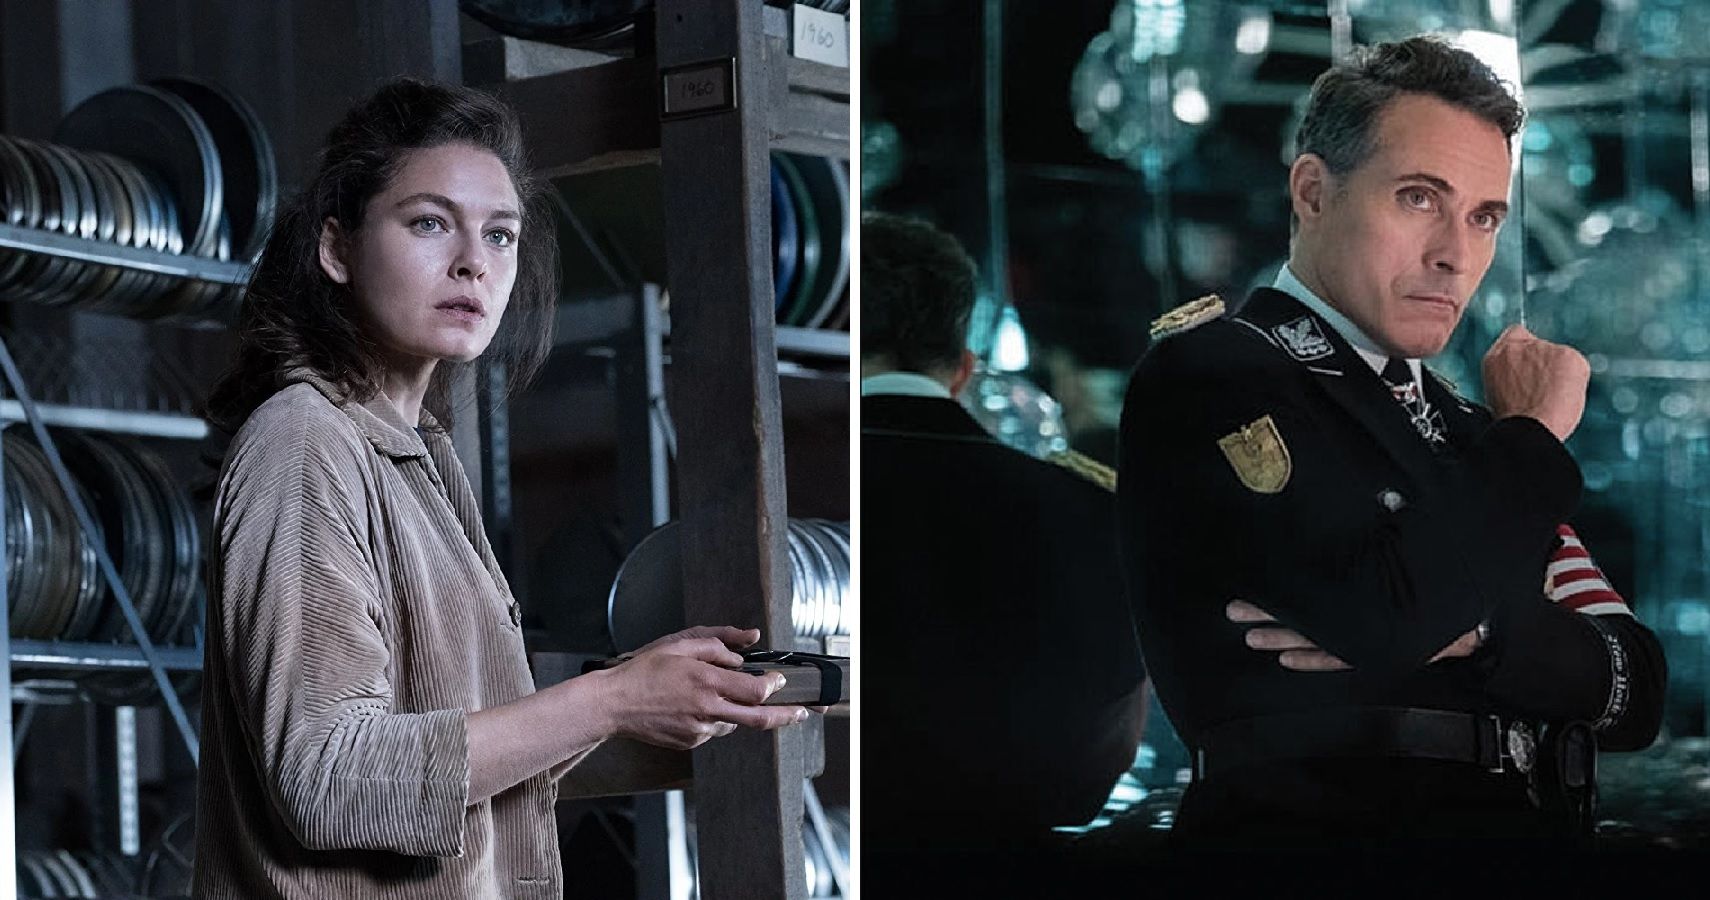 Juliana Crain and John Smith in The Man in the High Castle